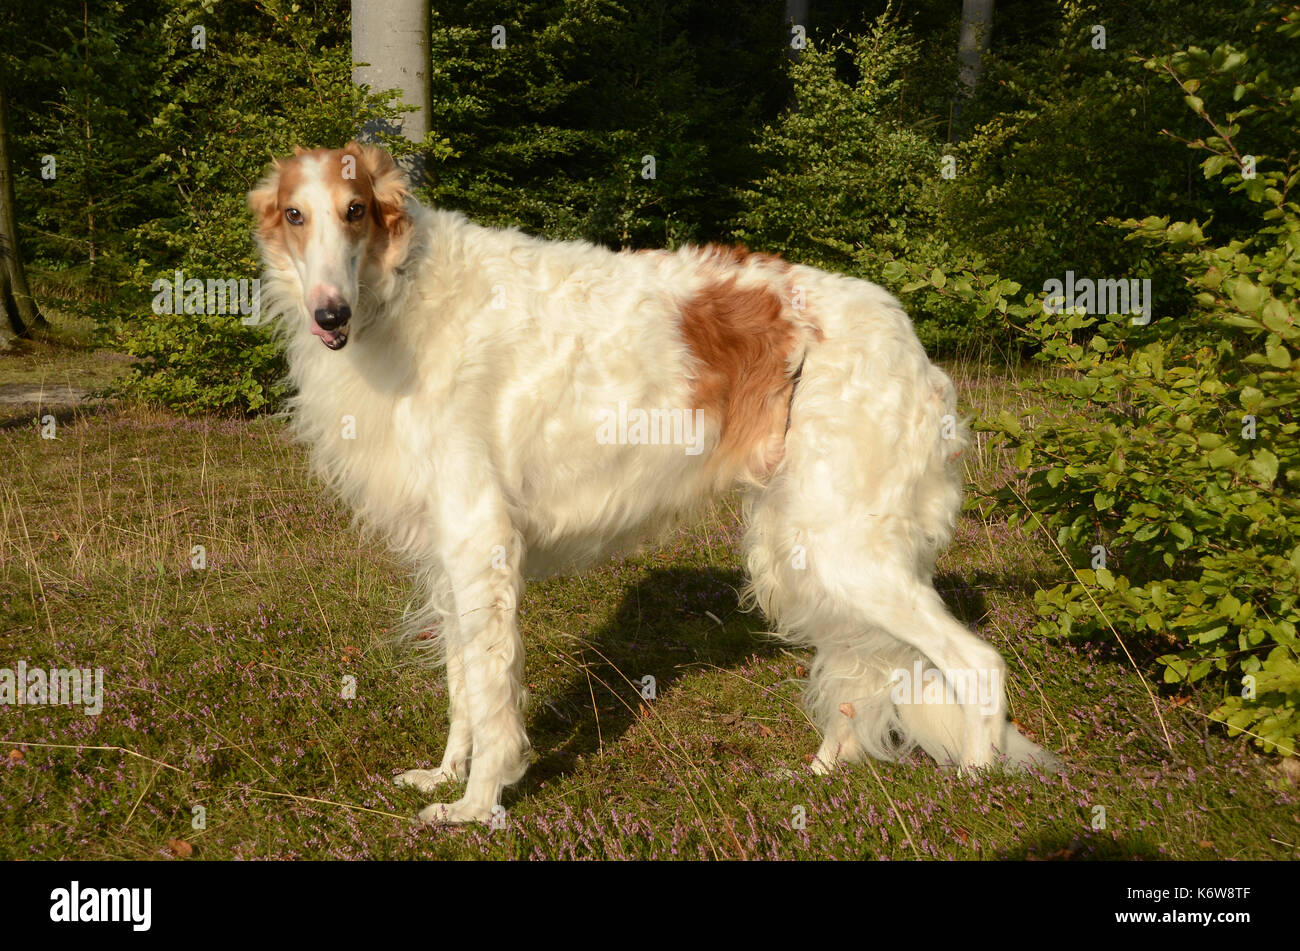 Borzoi dog seen in a forest, on a layer of heather in bloom. Stock Photo